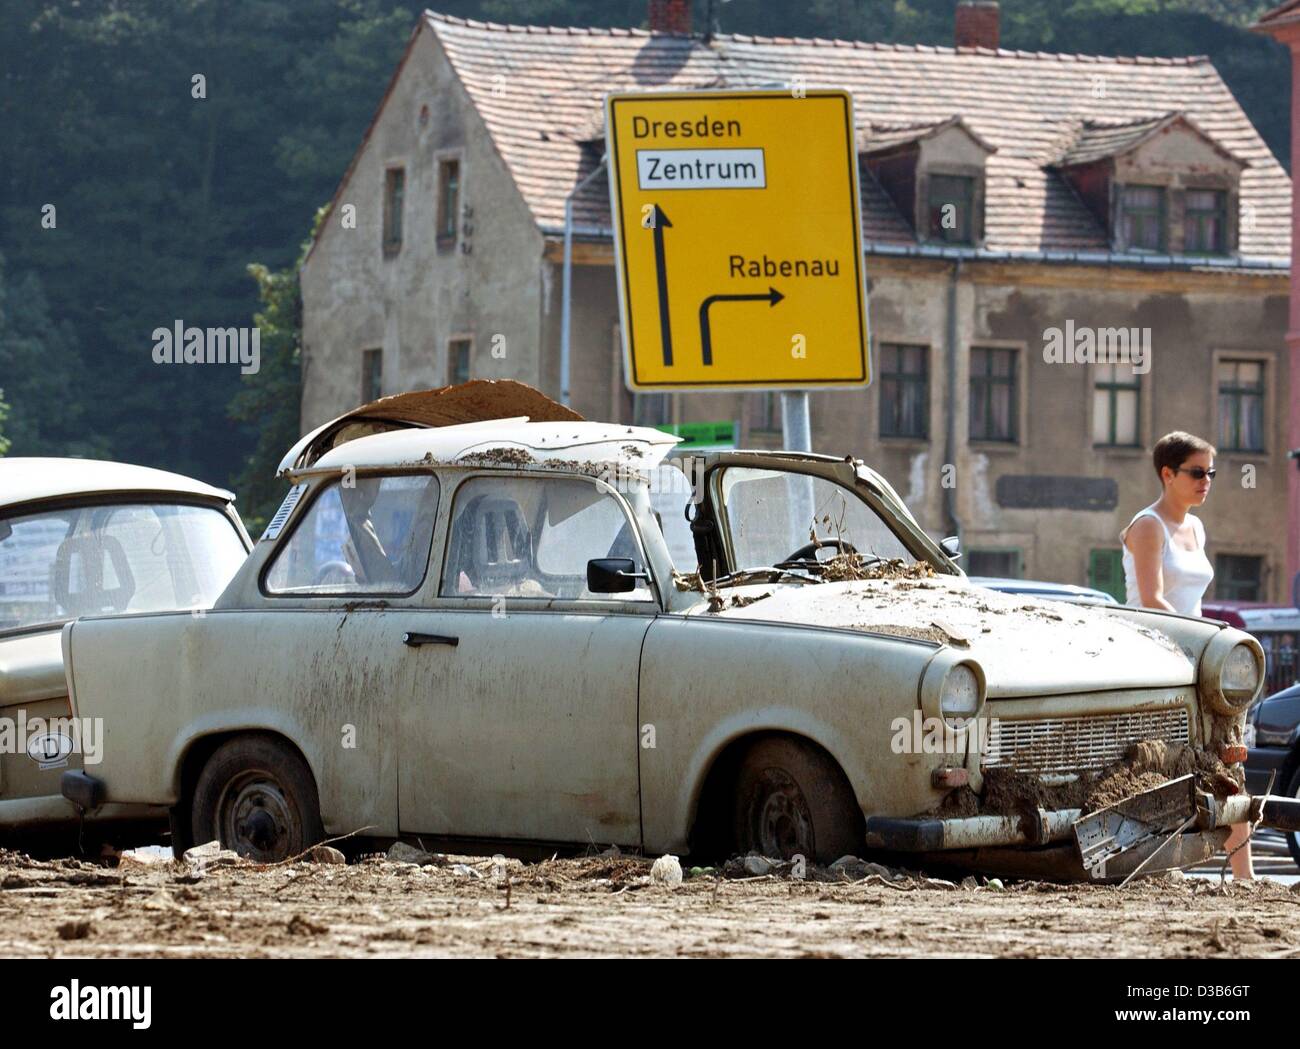 (dpa) - A devastated Trabant ('Trabi') car, destroyed by the floods in eastern Germany, stands in Freital, Germany, 25 August 2002. Ten days after the flood the residents are tired and take a break over the weekend from shoveling mud and cleaning up. Most of the shops are still closed. Stock Photo